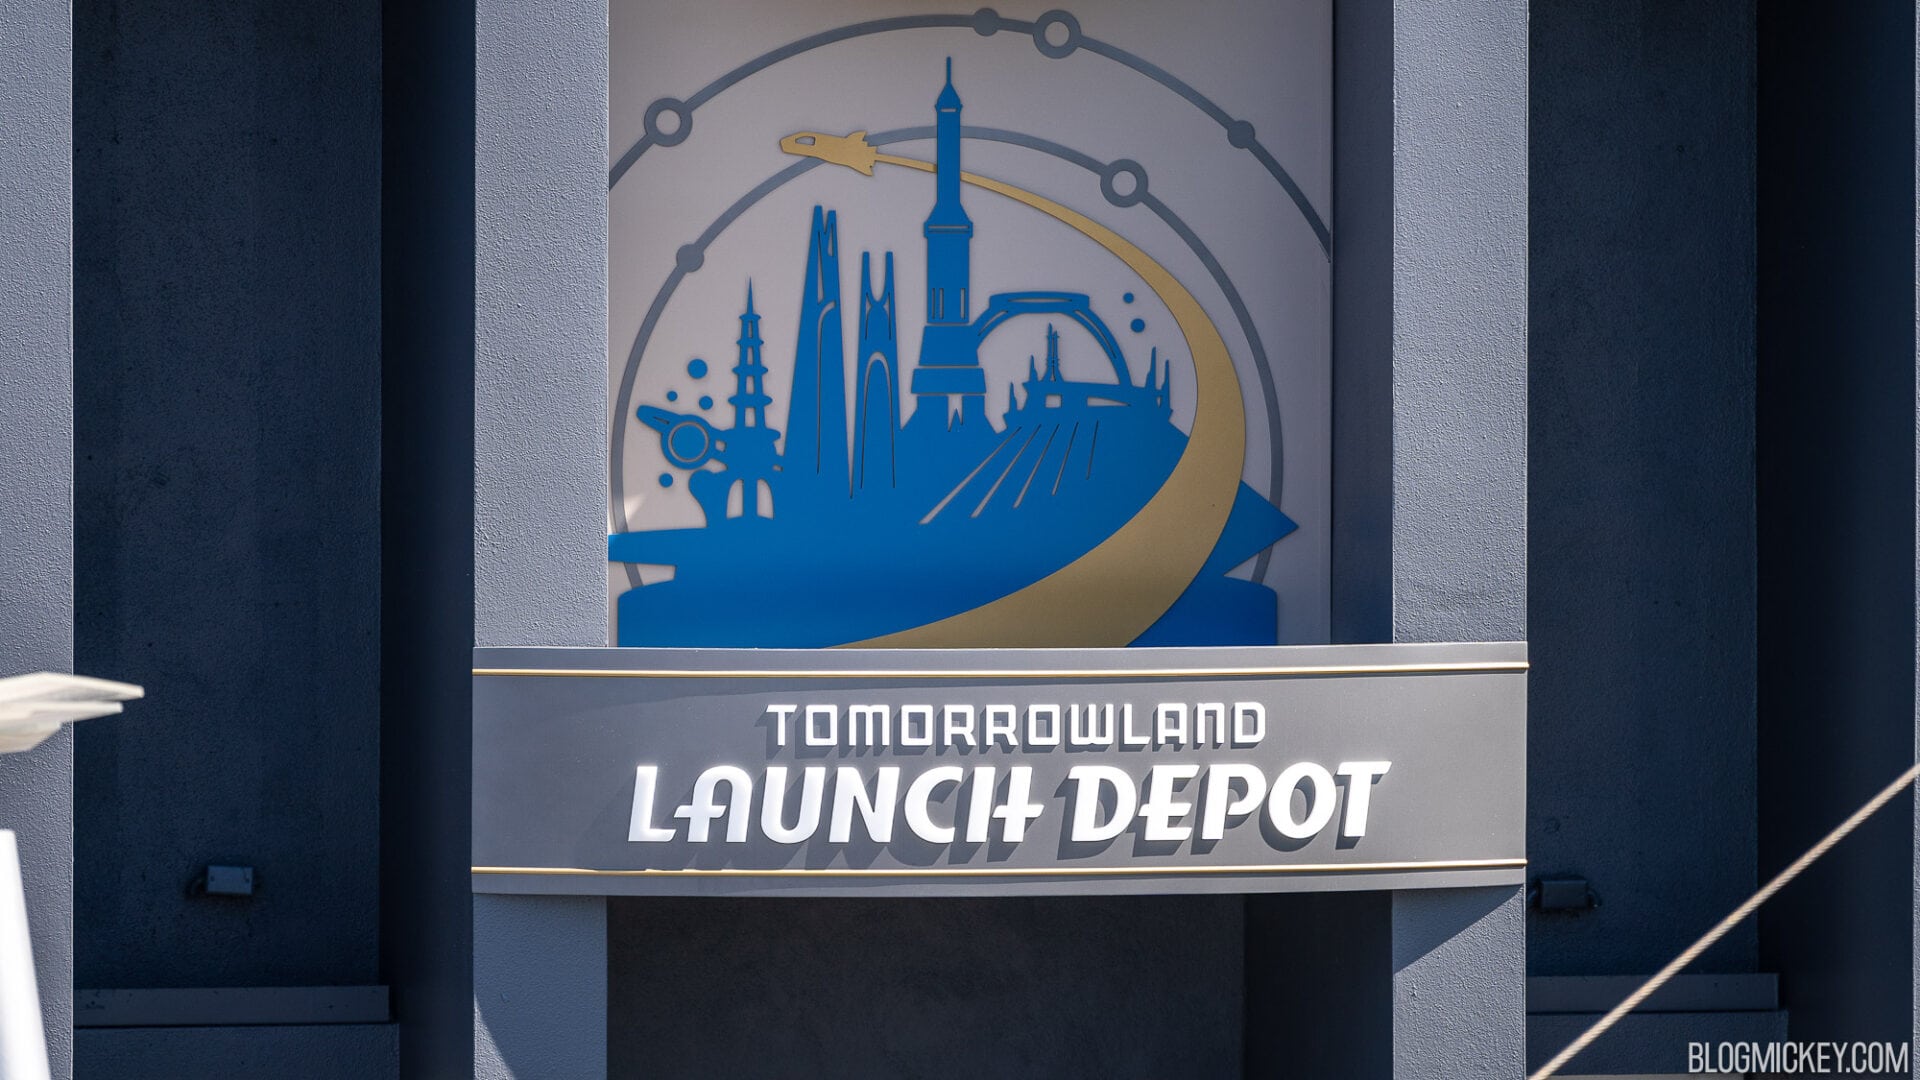 tomorrowland-launch-depot-sign-installed-6-1920x1080.jpg